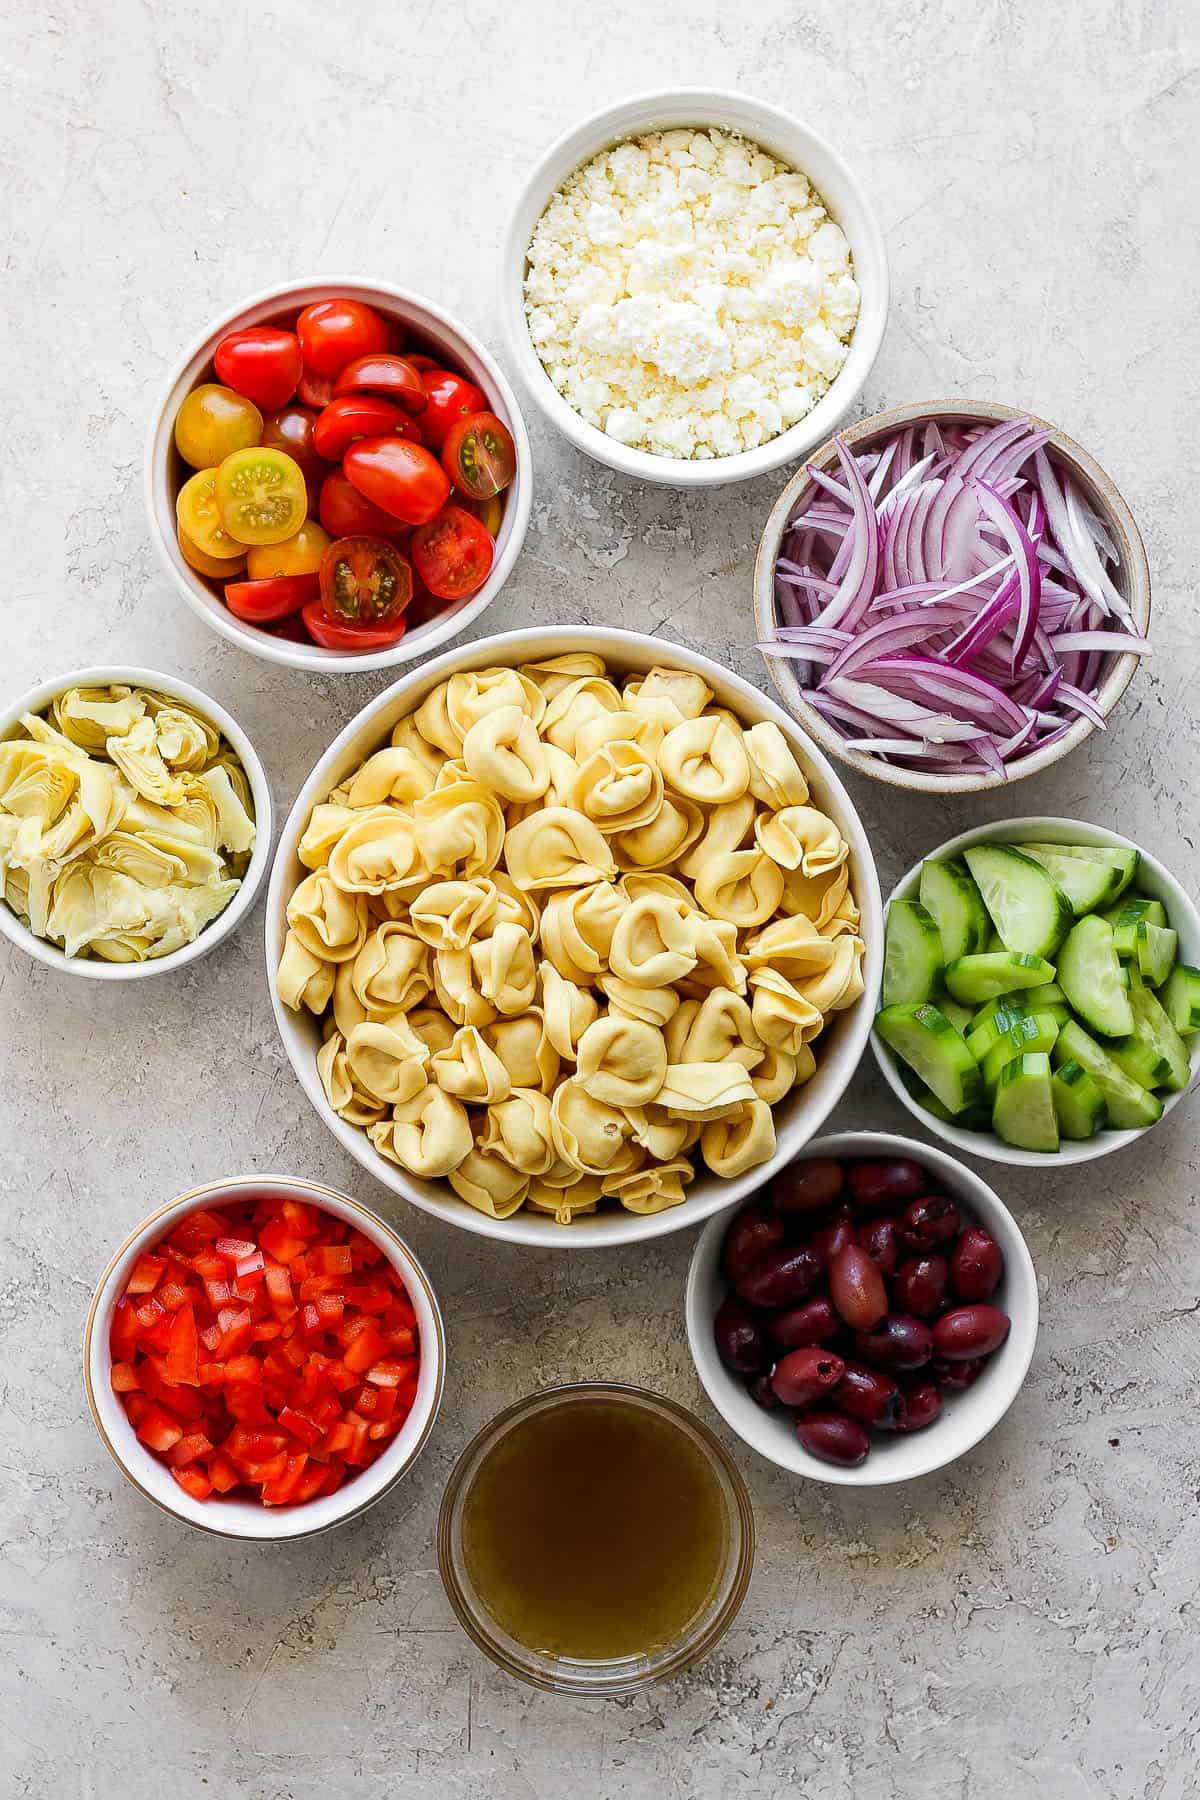 Individual bowls of feta cheese, sliced cherry tomatoes, sliced red onion, artichoke hearts, cheese tortellini, sliced cucumbers, olives, diced red bell pepper, and salad dressing. 